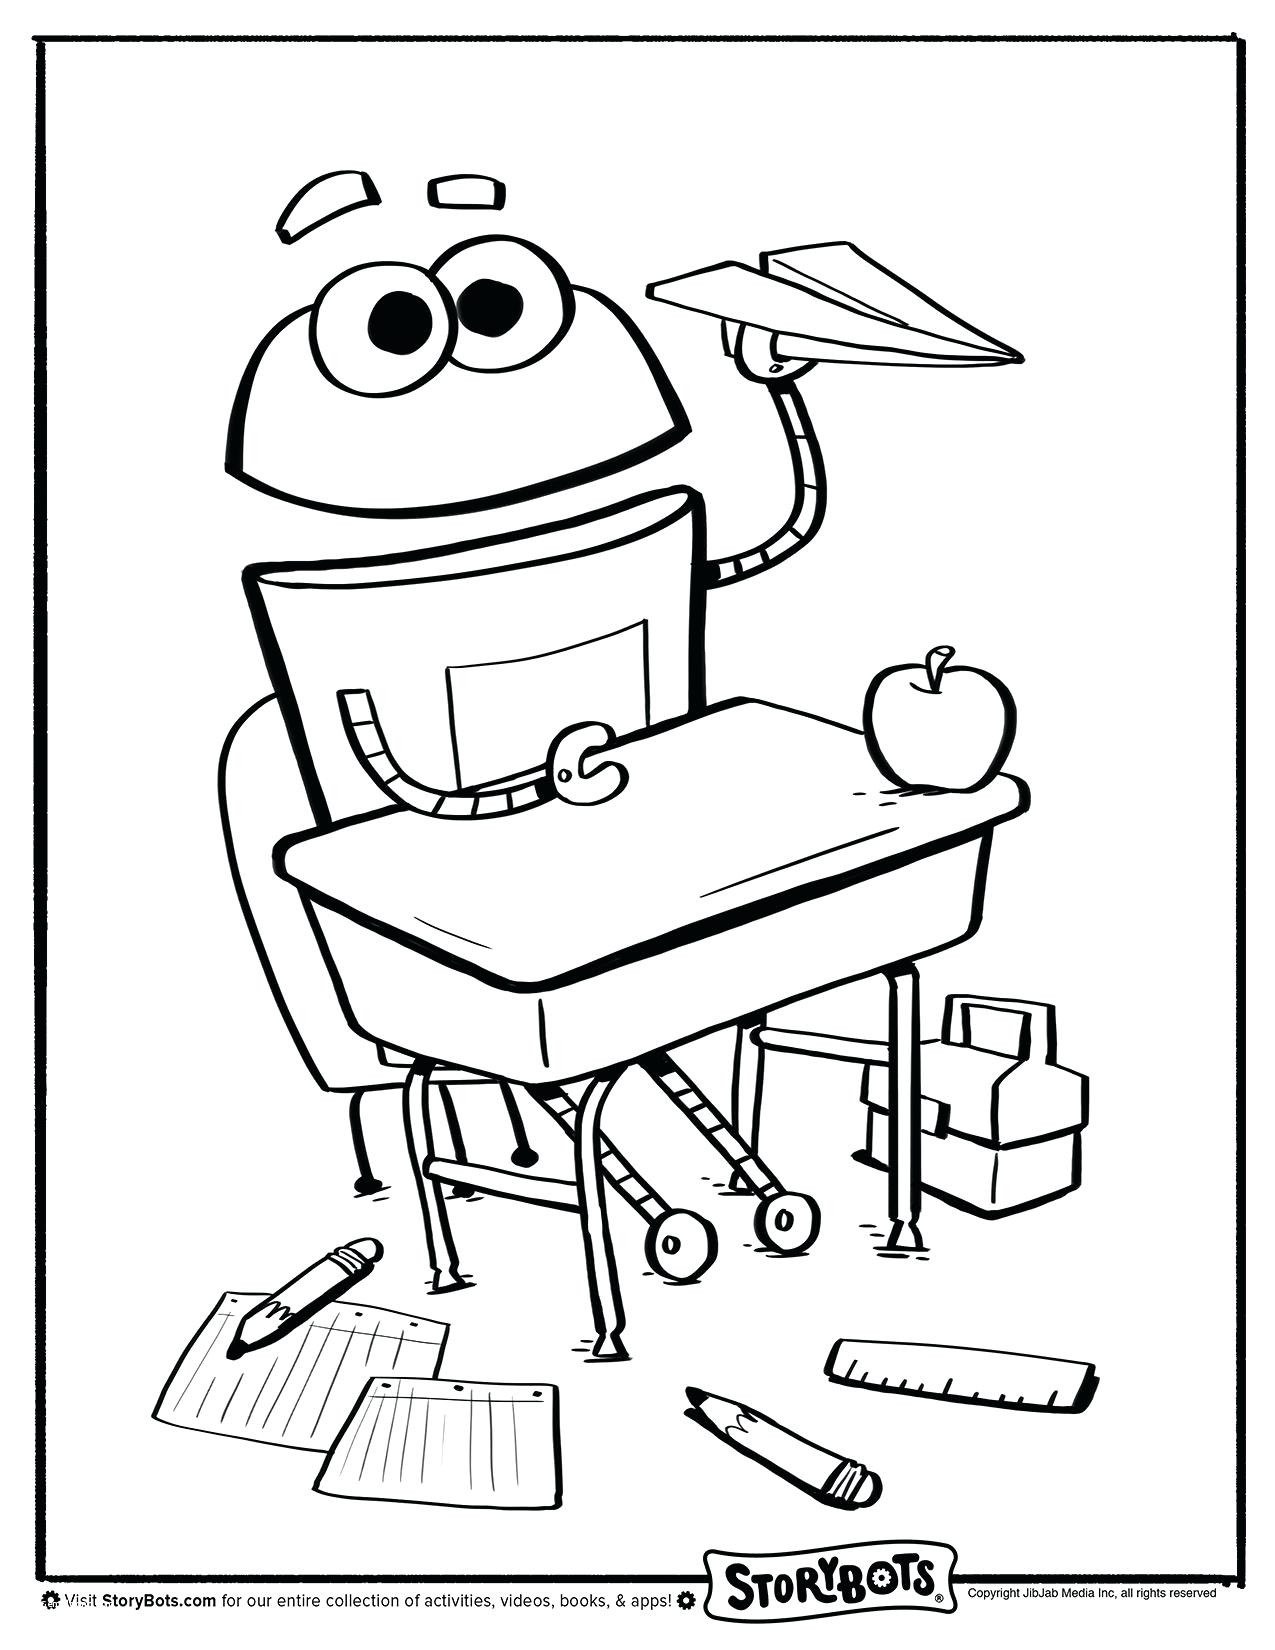 Worksheets Coloring Sheets For Middle Storybots Coloring Pages coloring  pages storybots coloring I trust coloring pages.